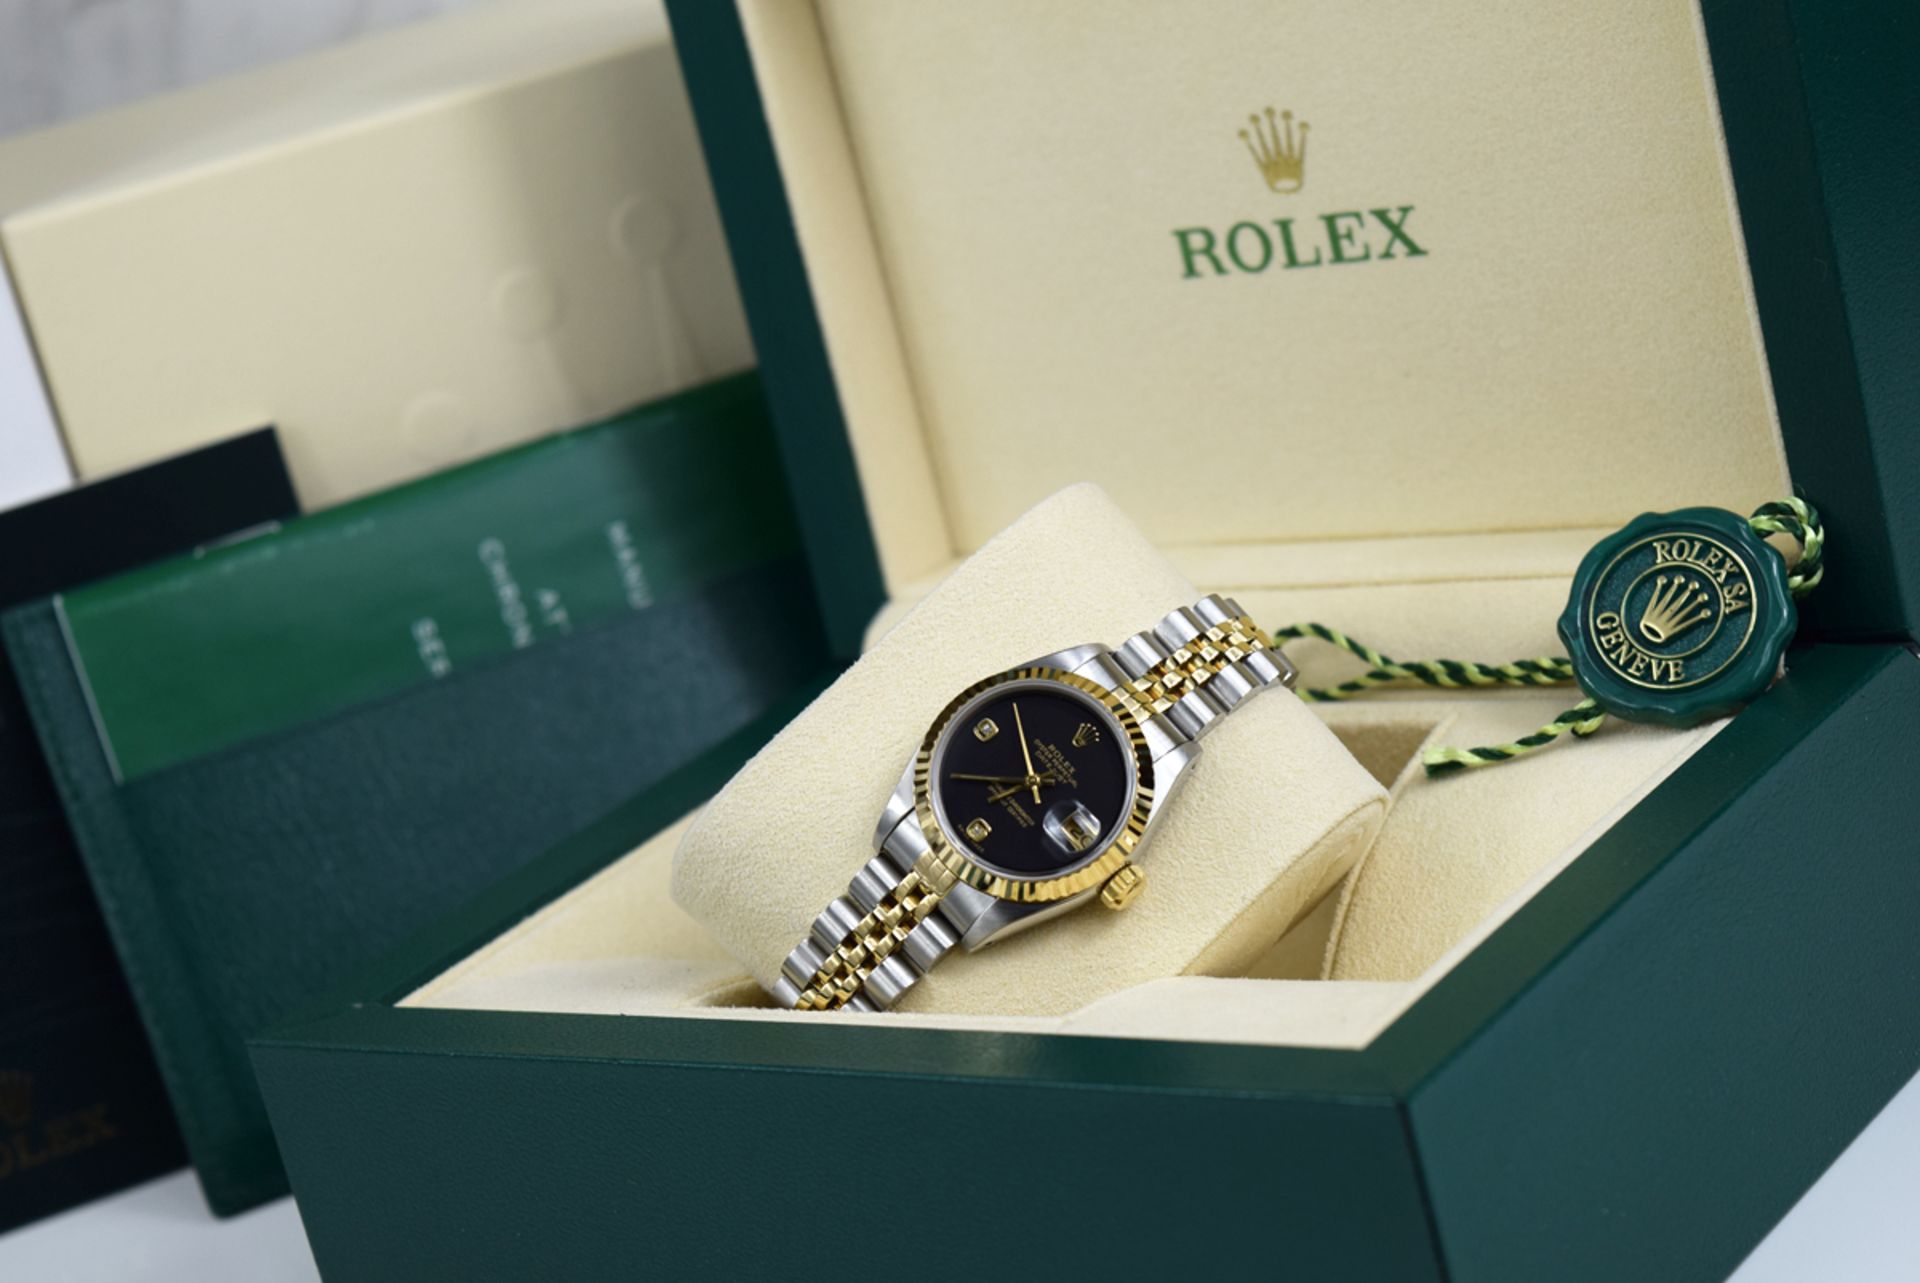 ROLEX 'LADY DATEJUST' 26MM - STEEL & 18K GOLD WITH ✦ RARE DIAMOND DIAL